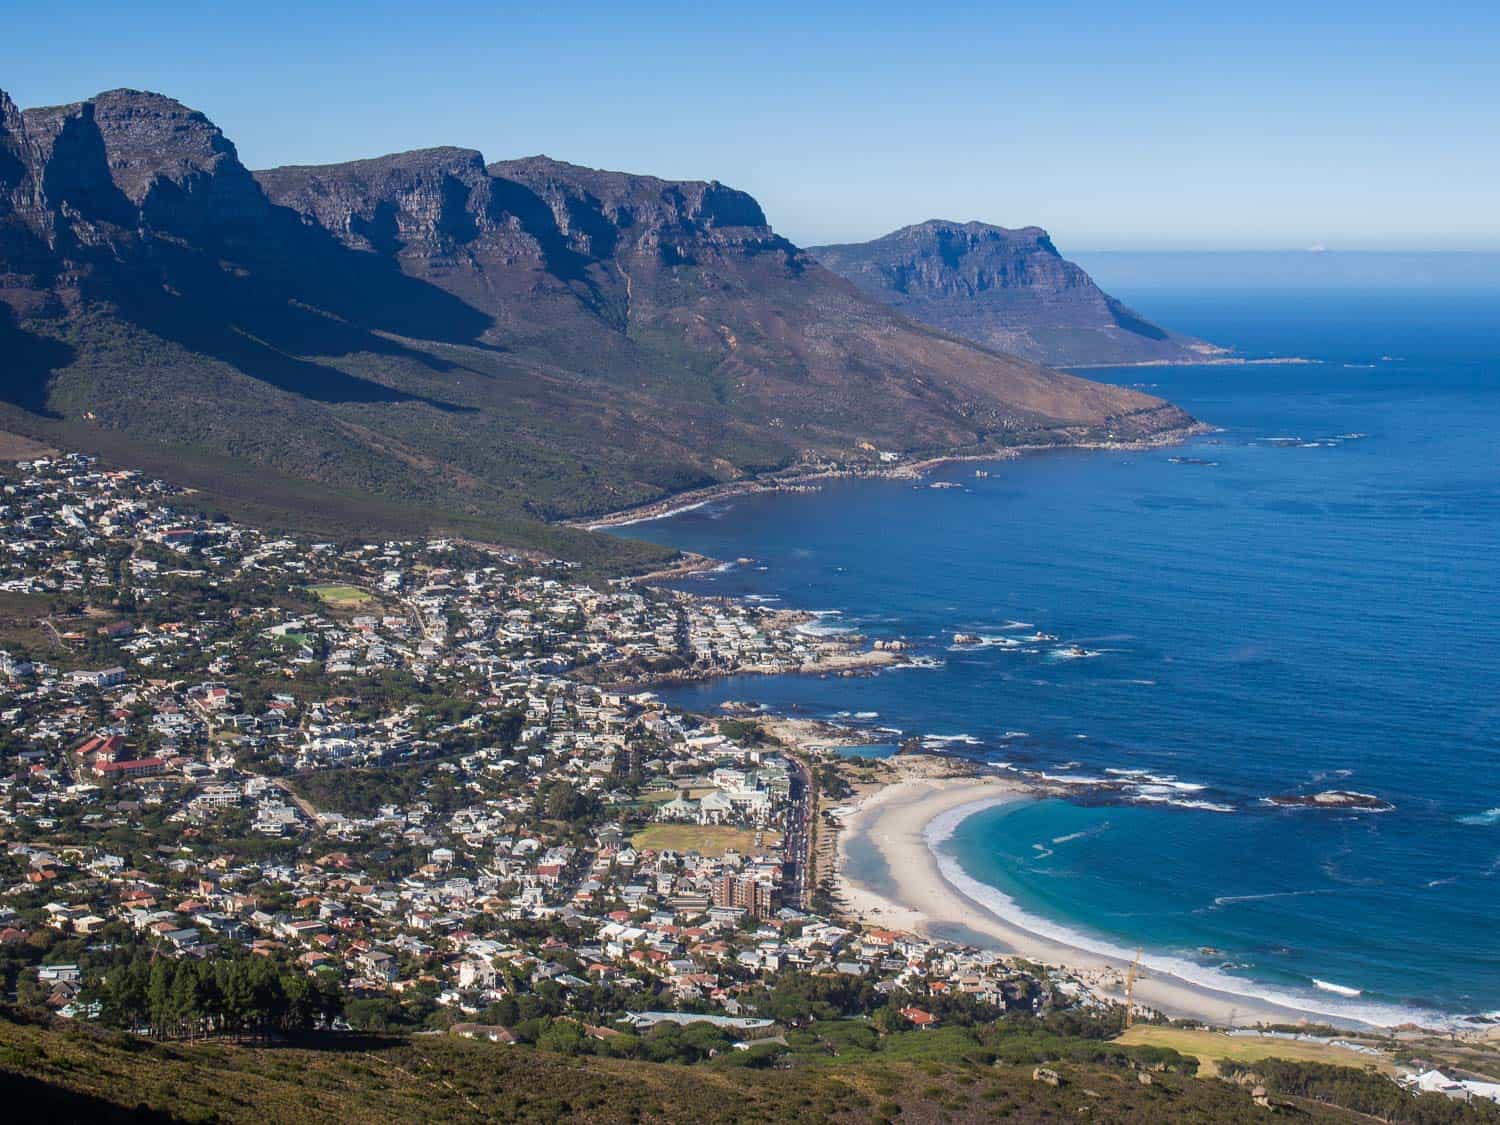 The view of Camps Bay from Lion's Head - one of the best hikes in Cape Town